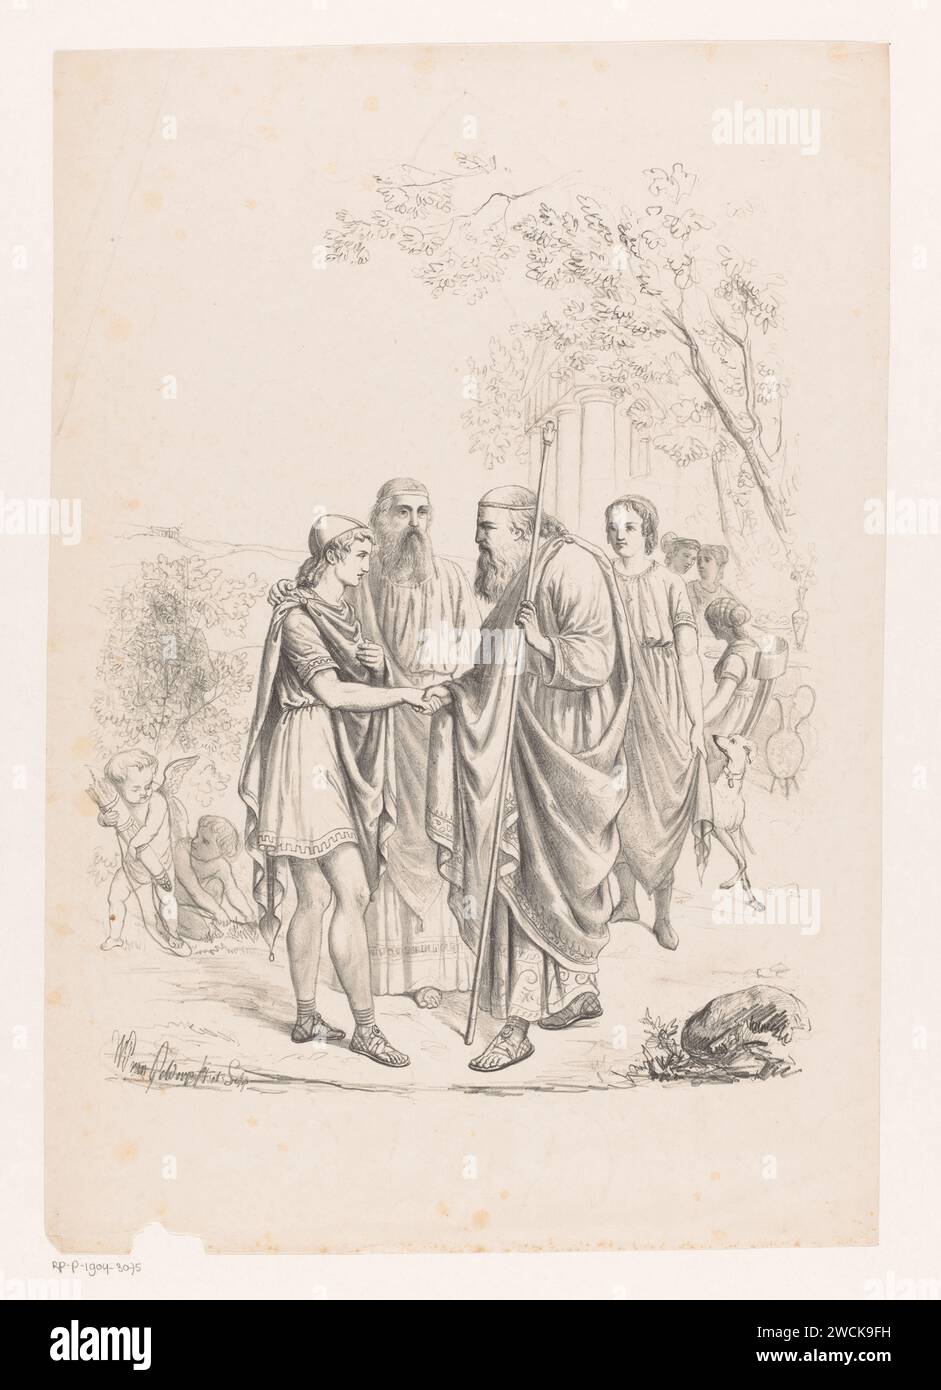 Telemachus visits Nestor on the island of Pylon, Wilhelmus Petrus van Geldorp, 1870 print Telemachus left home to find his father Odysseus. Athena, disguised as an old man named Mentor, accompanies him. She gives him the courage to address King Nestor. Rotterdam paper  Telemachus' encounter with Nestor at the sea-shore during a sacrifice to Neptune. shaking hands, 'dextrarum junctio'. Nestor. Telemachus in Pylus Stock Photo